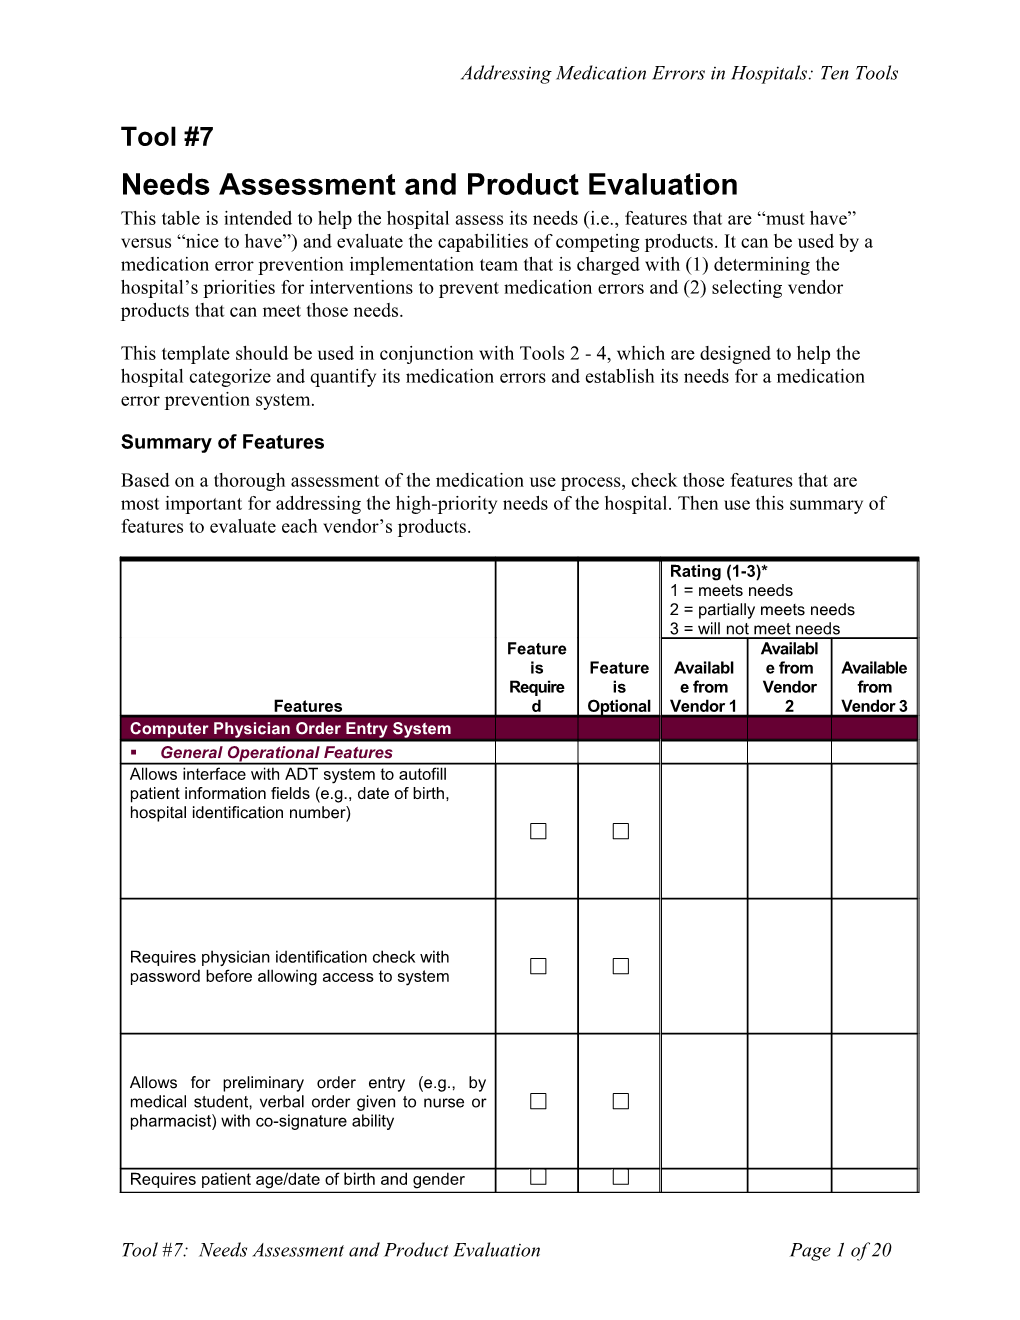 Needs Assessment and Product Evaluation